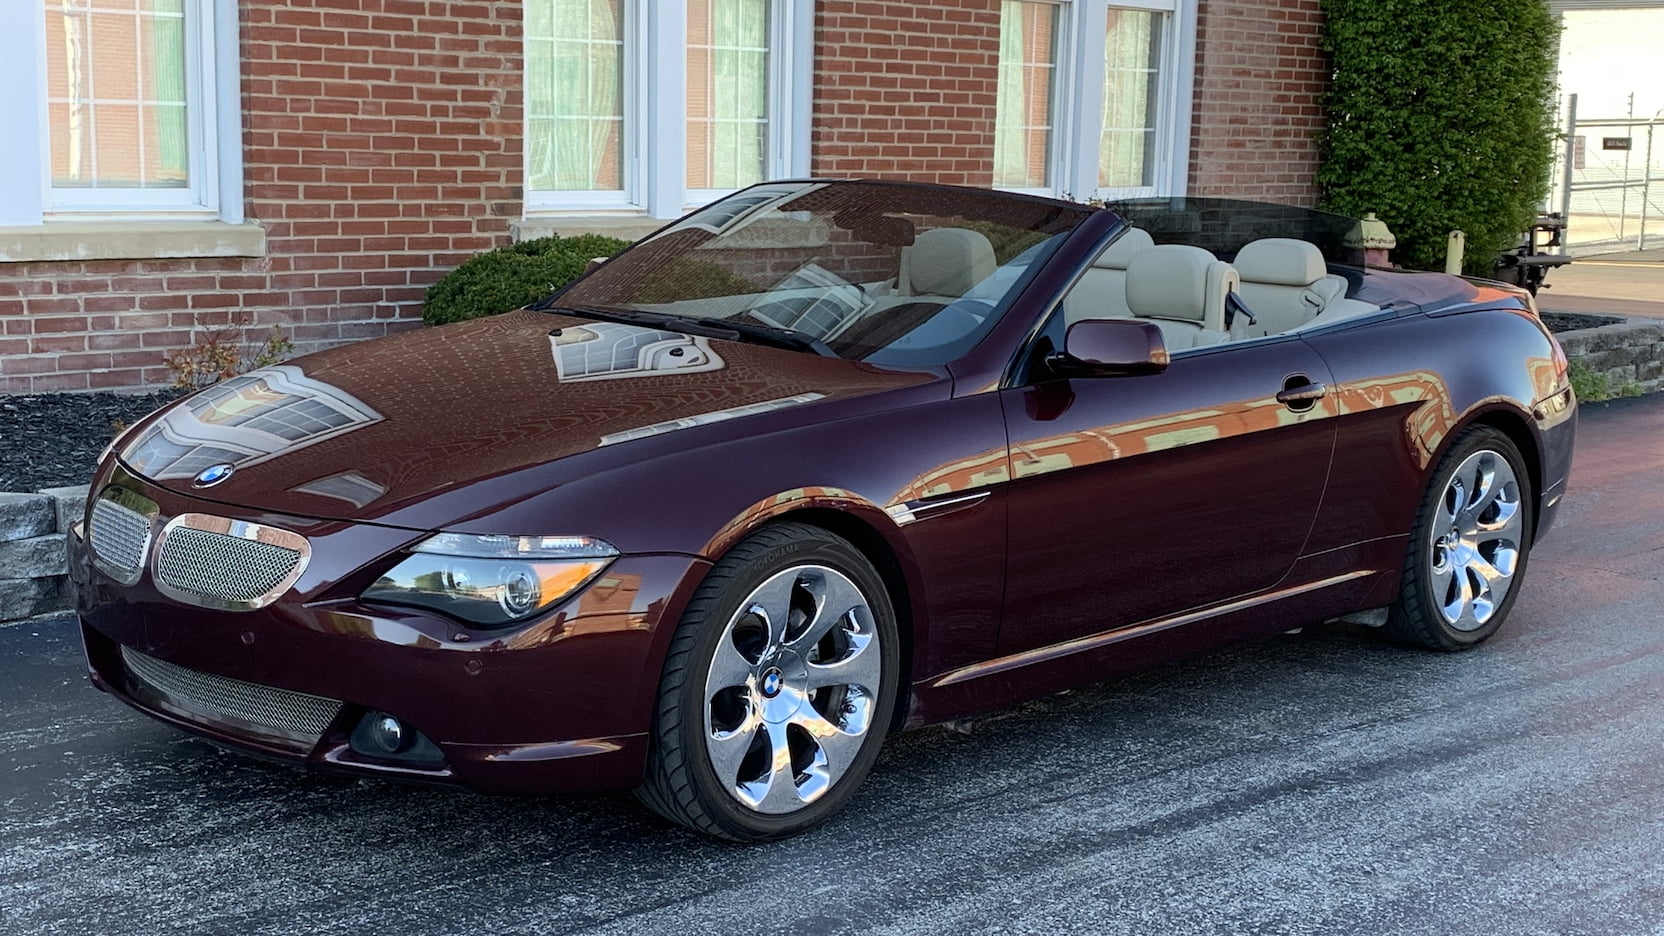 2006 BMW 650i Convertible | W229.1 | Indy 2019